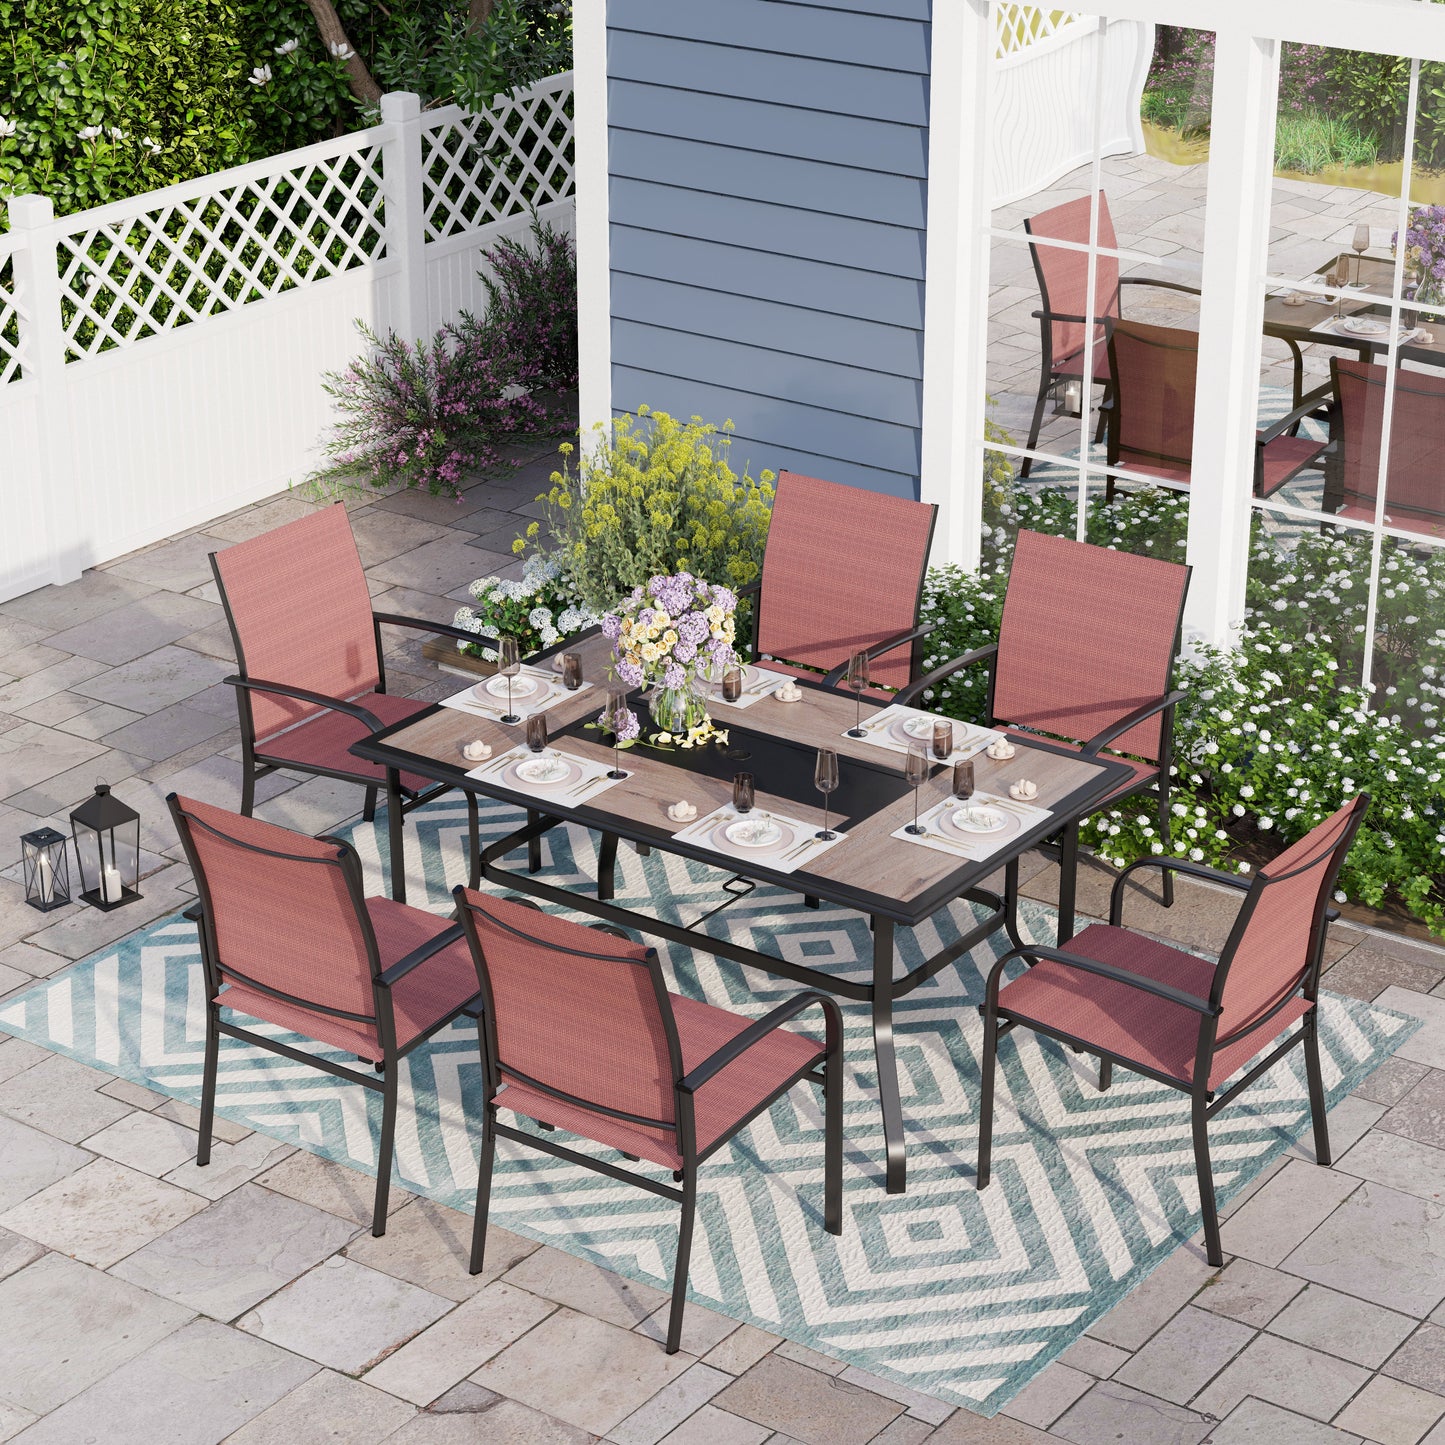 Sophia & William 7 Piece Patio Metal Dining Set Patio Dining Table and 6 Red Textilene Chairs